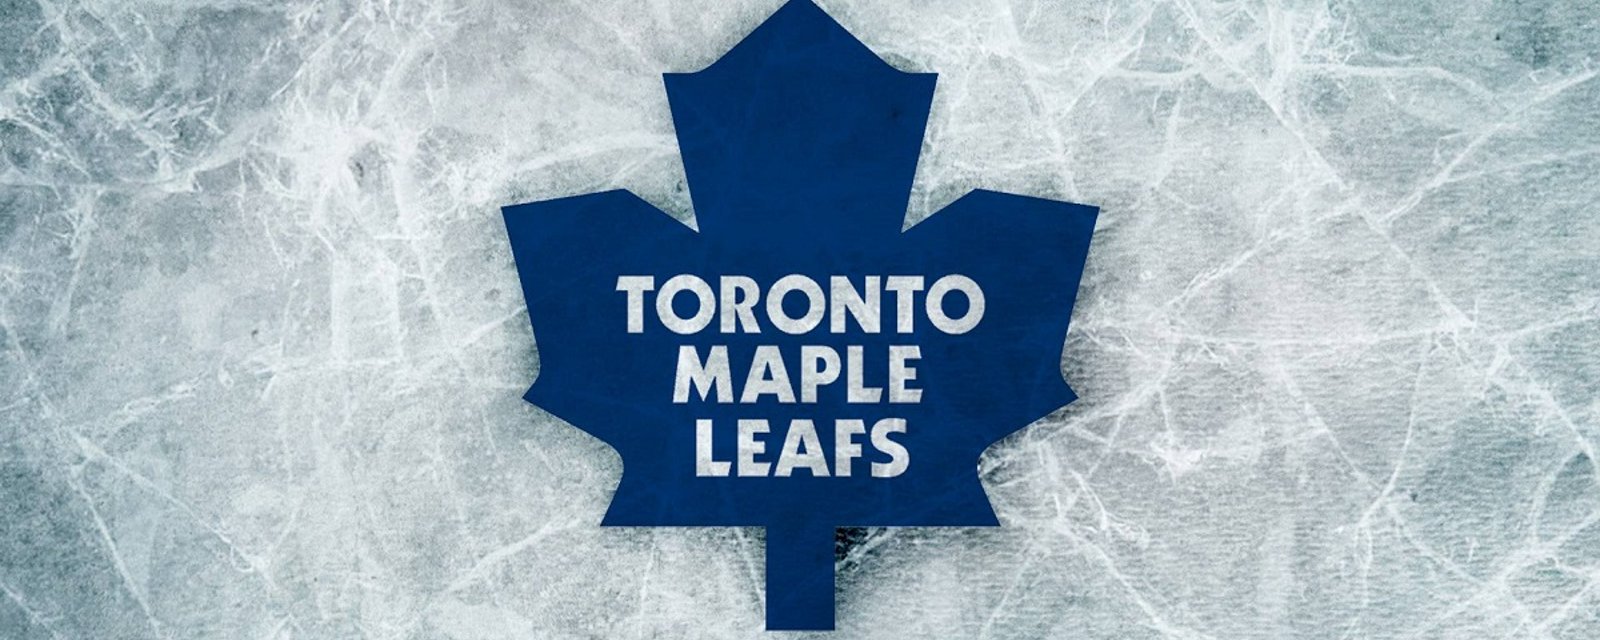 Breaking: Leafs make a big move, acquire young forward on waivers.